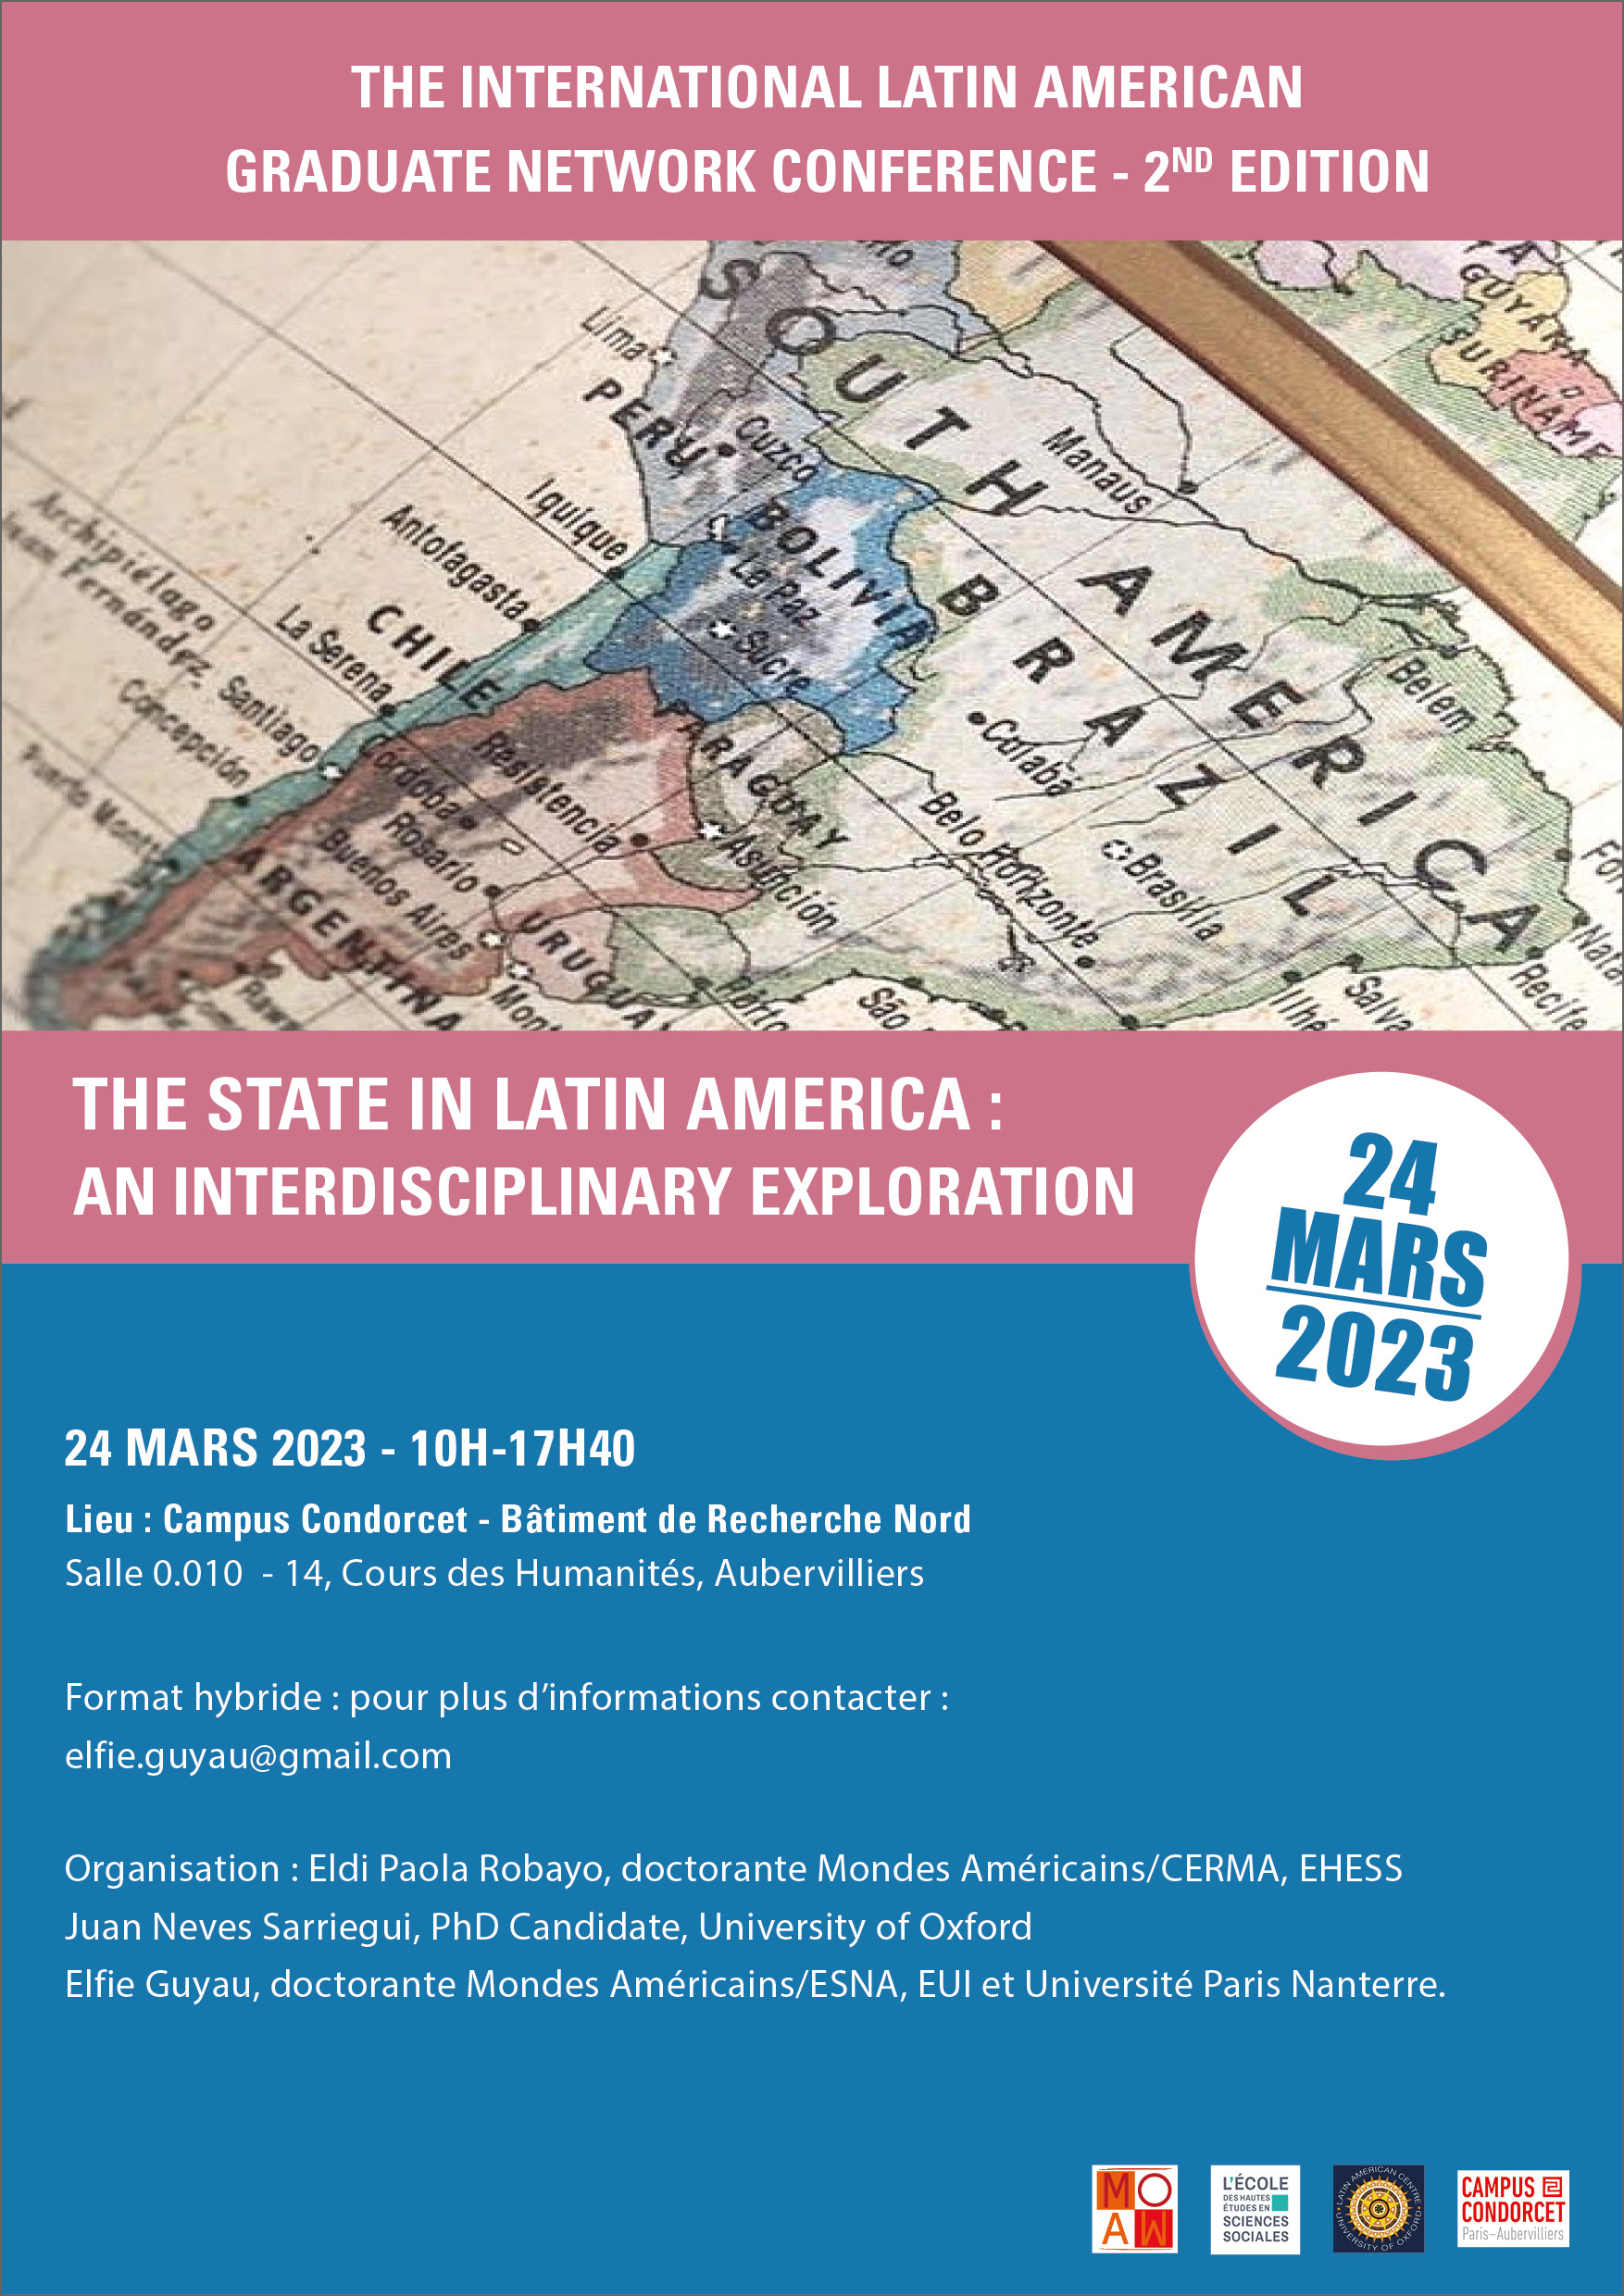 The International Latin American Graduate Network Conference - 2nd